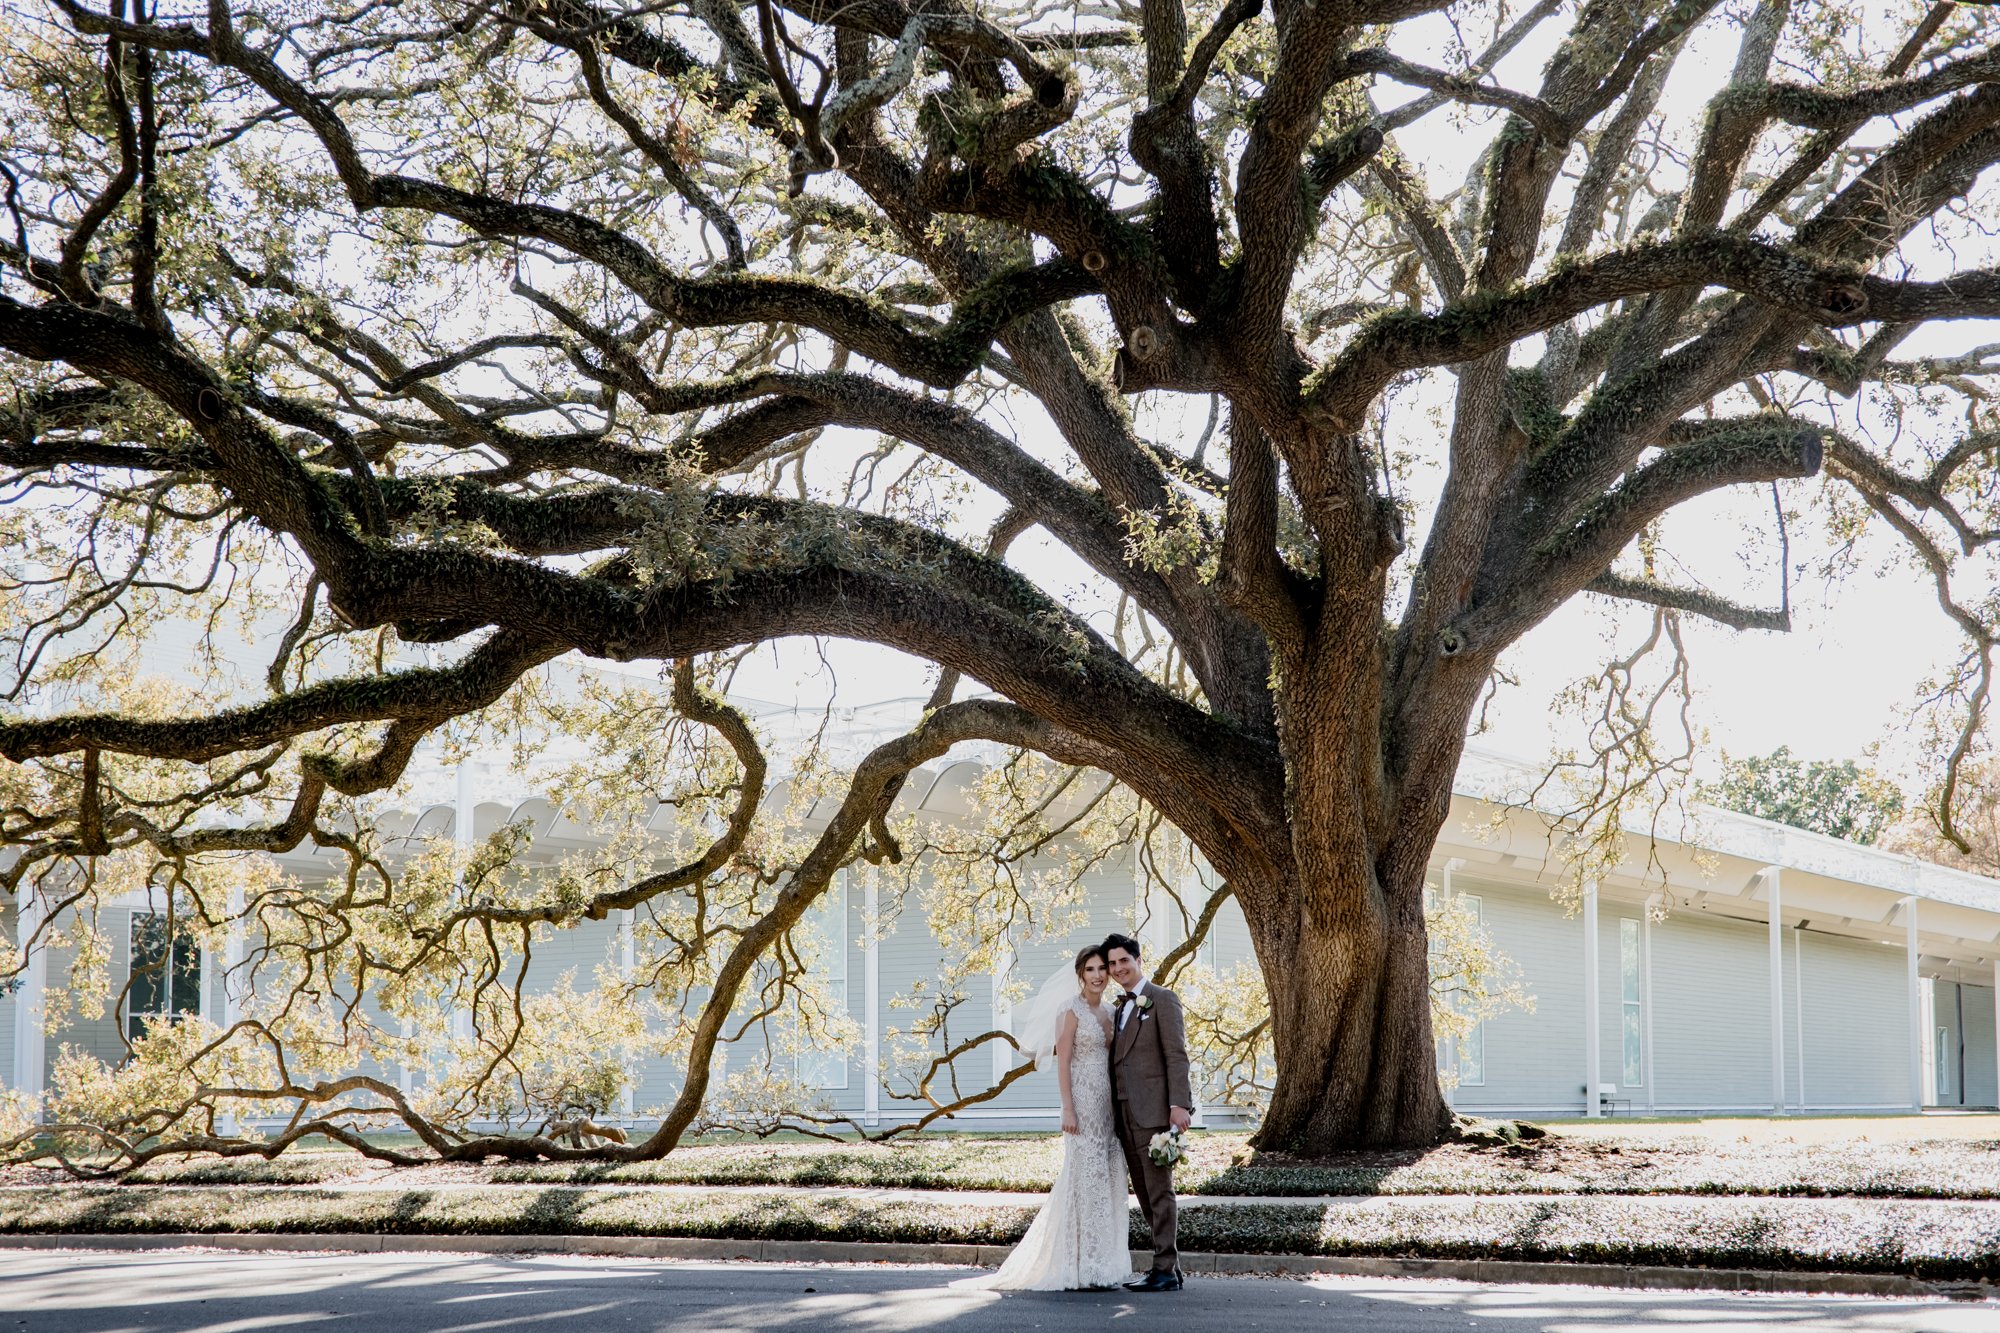 Wedding bride and groom at Menil Park by the live oak